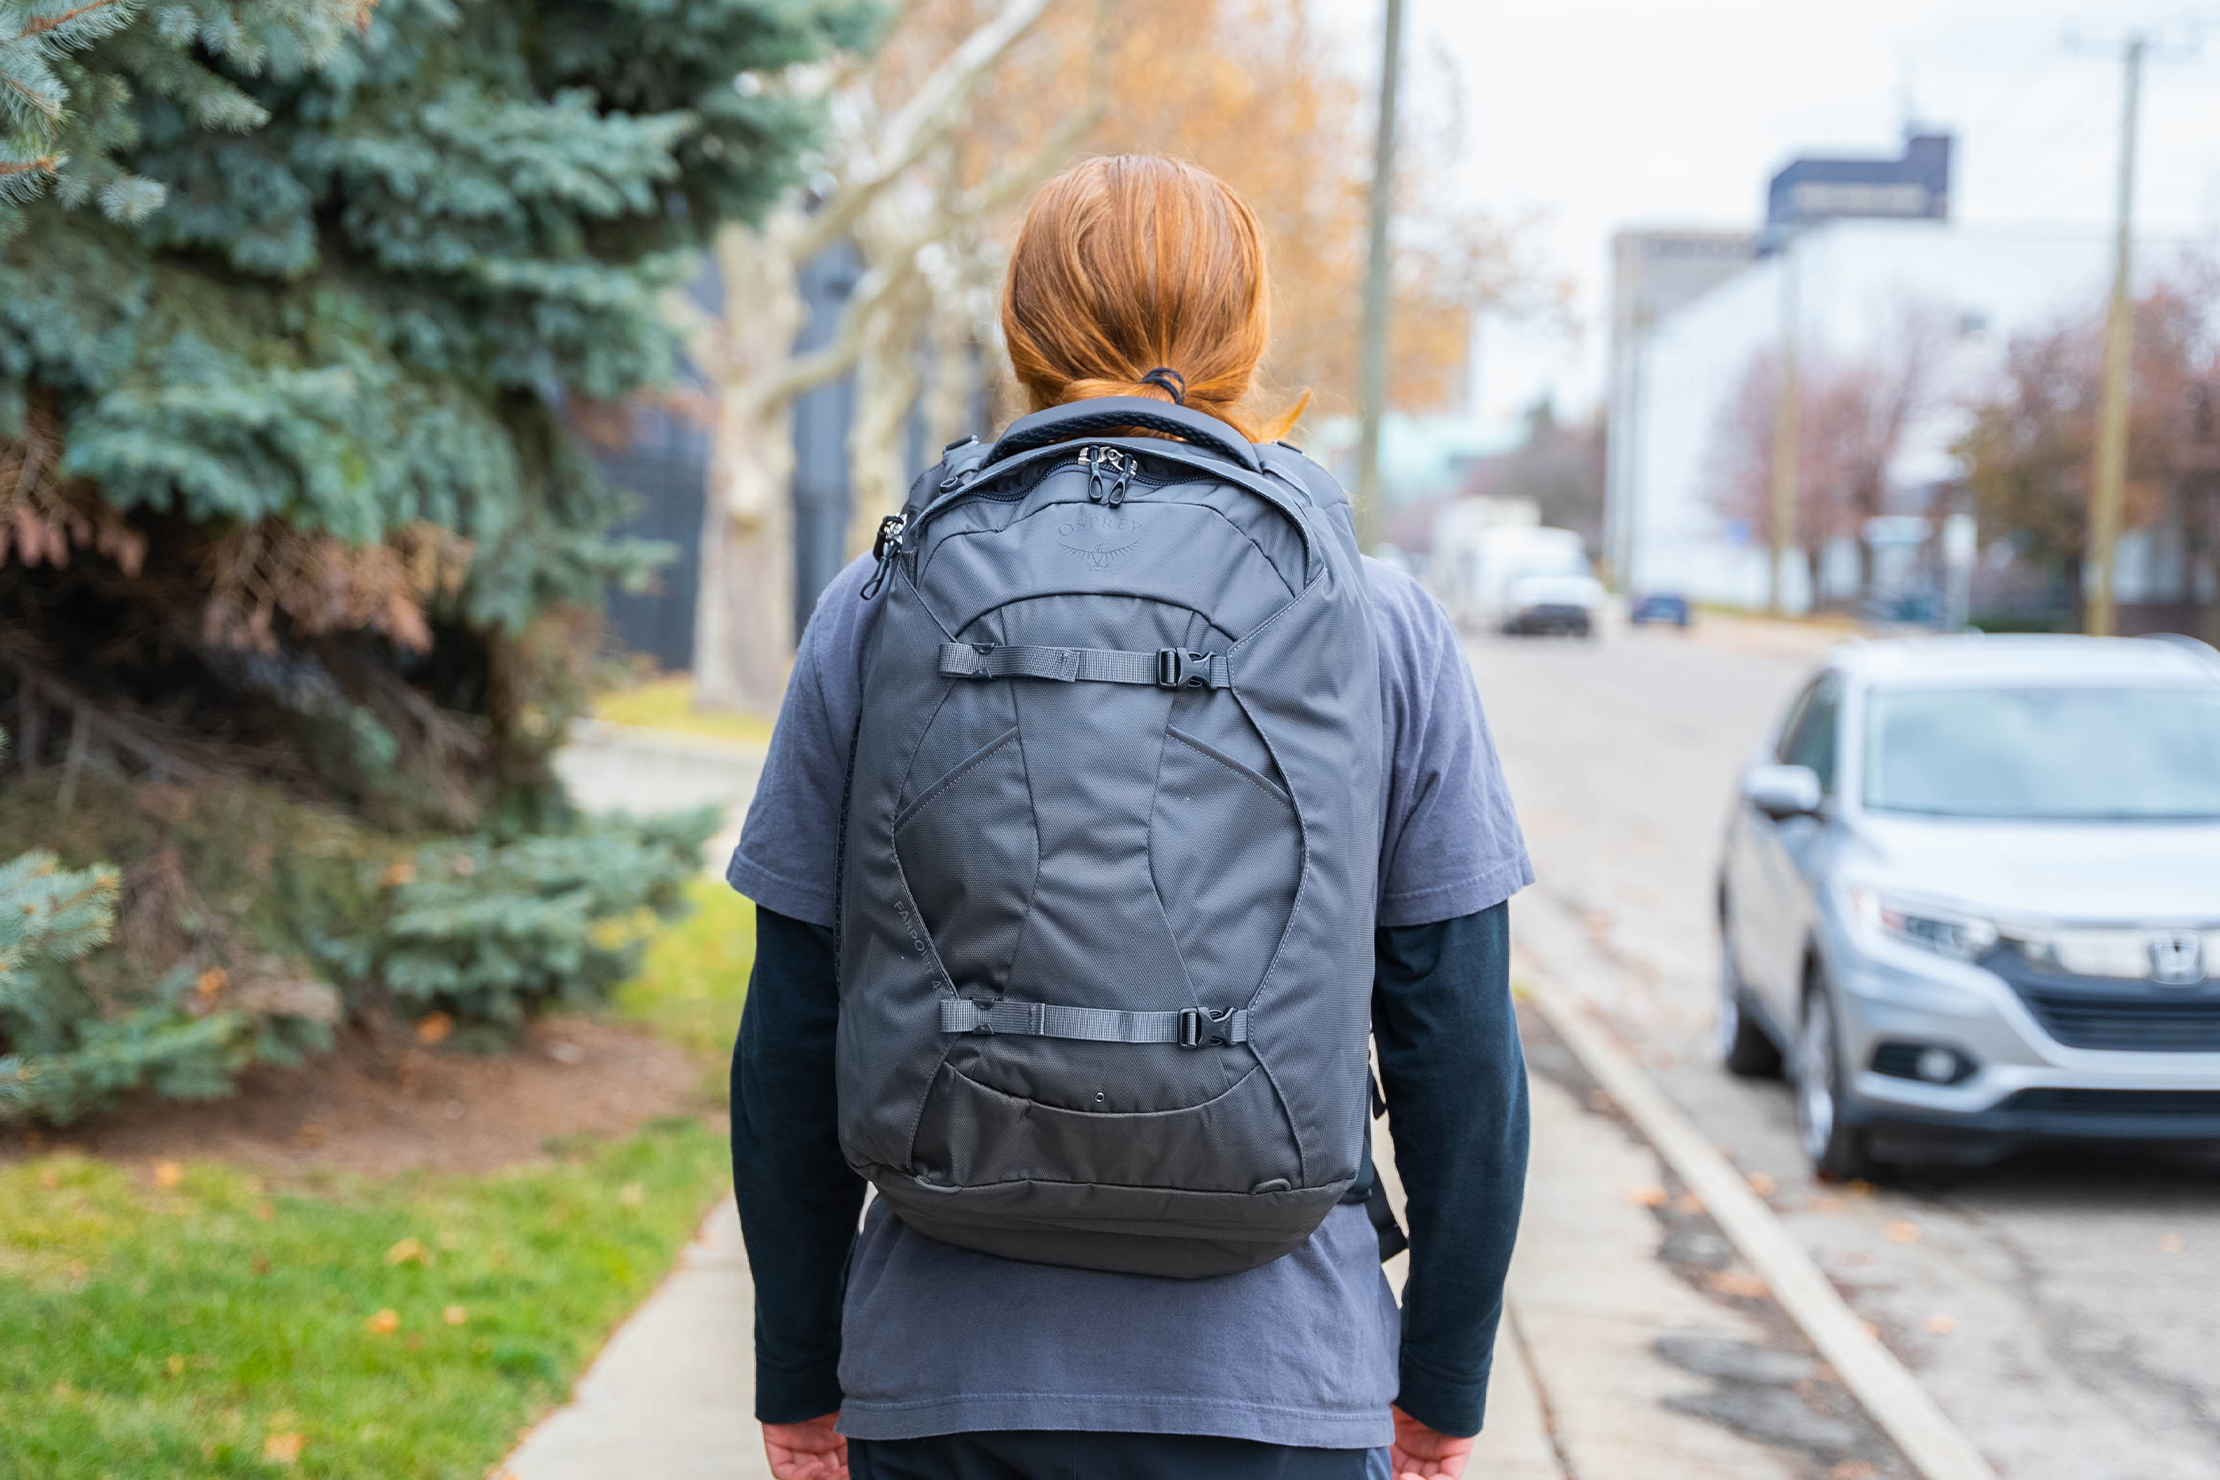 Best rucksack for travelling: Osprey Farpoint 40 backpack review